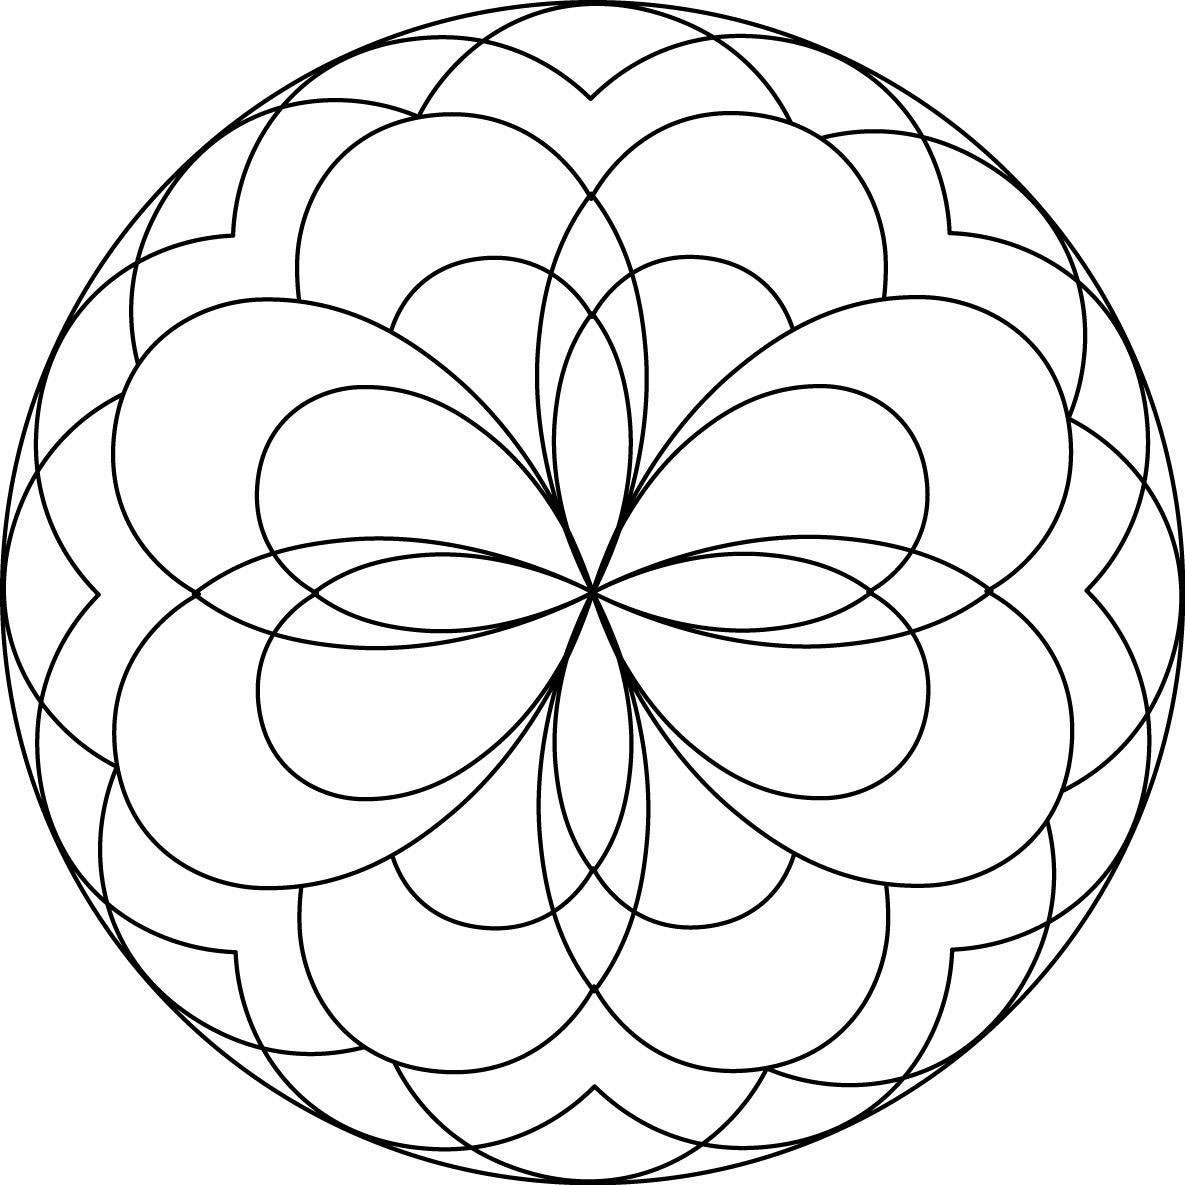 Simple mandala coloring pages download and print for free